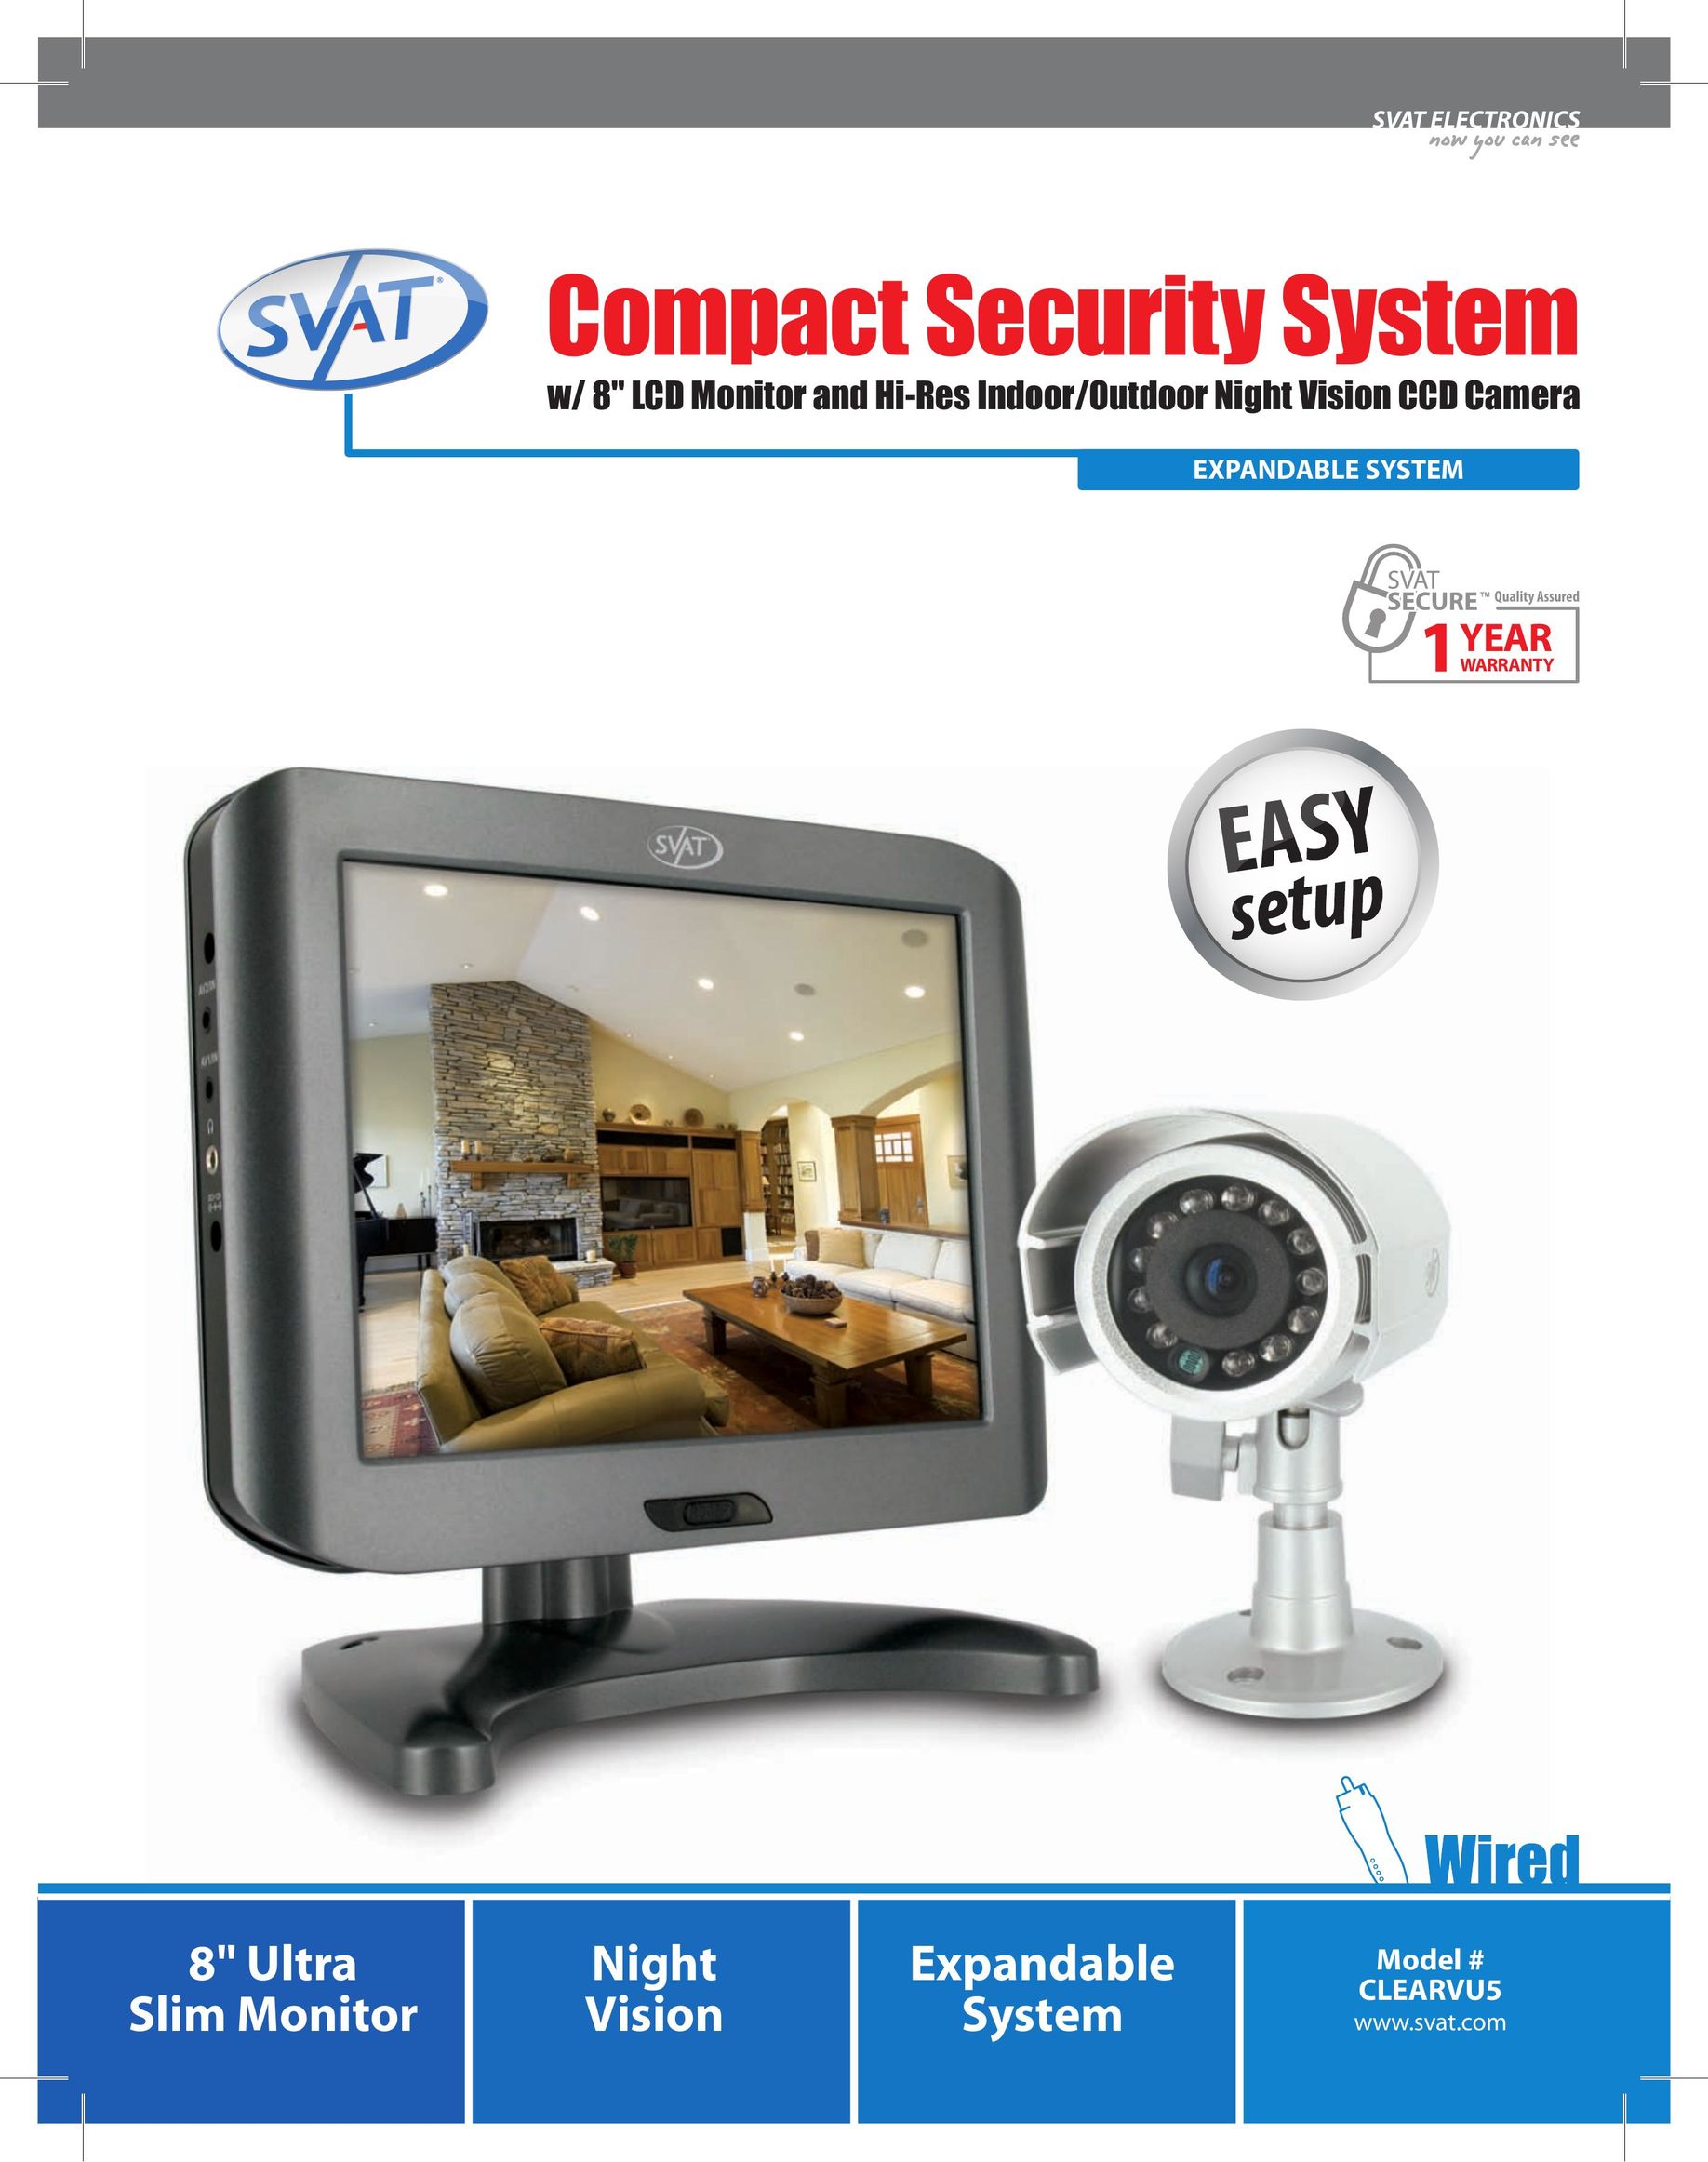 SVAT Electronics CLEARVU5 Home Security System User Manual